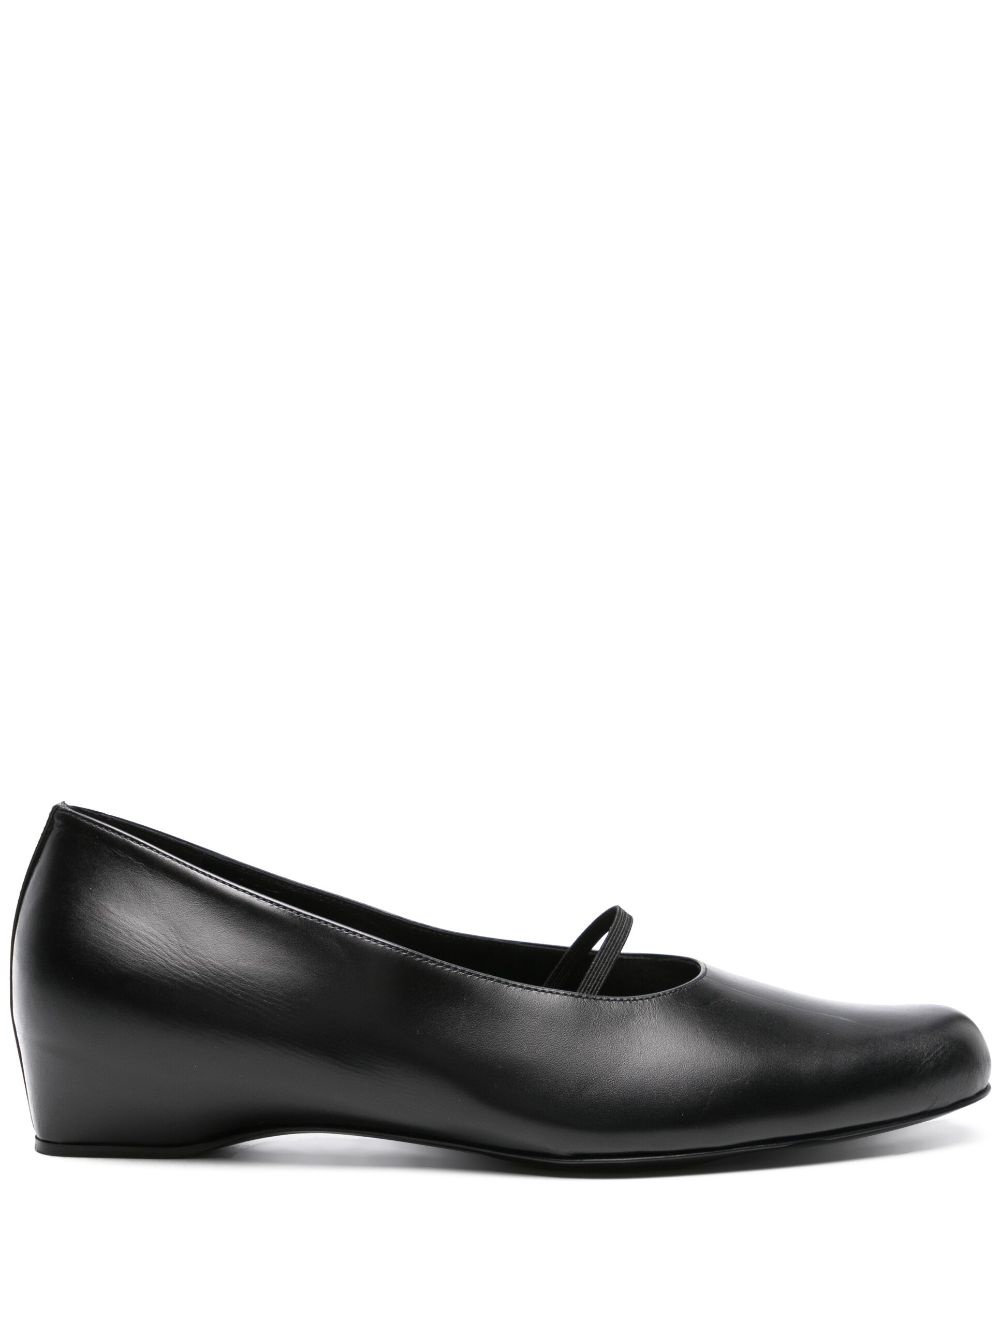 Marion leather ballerina shoes - 1